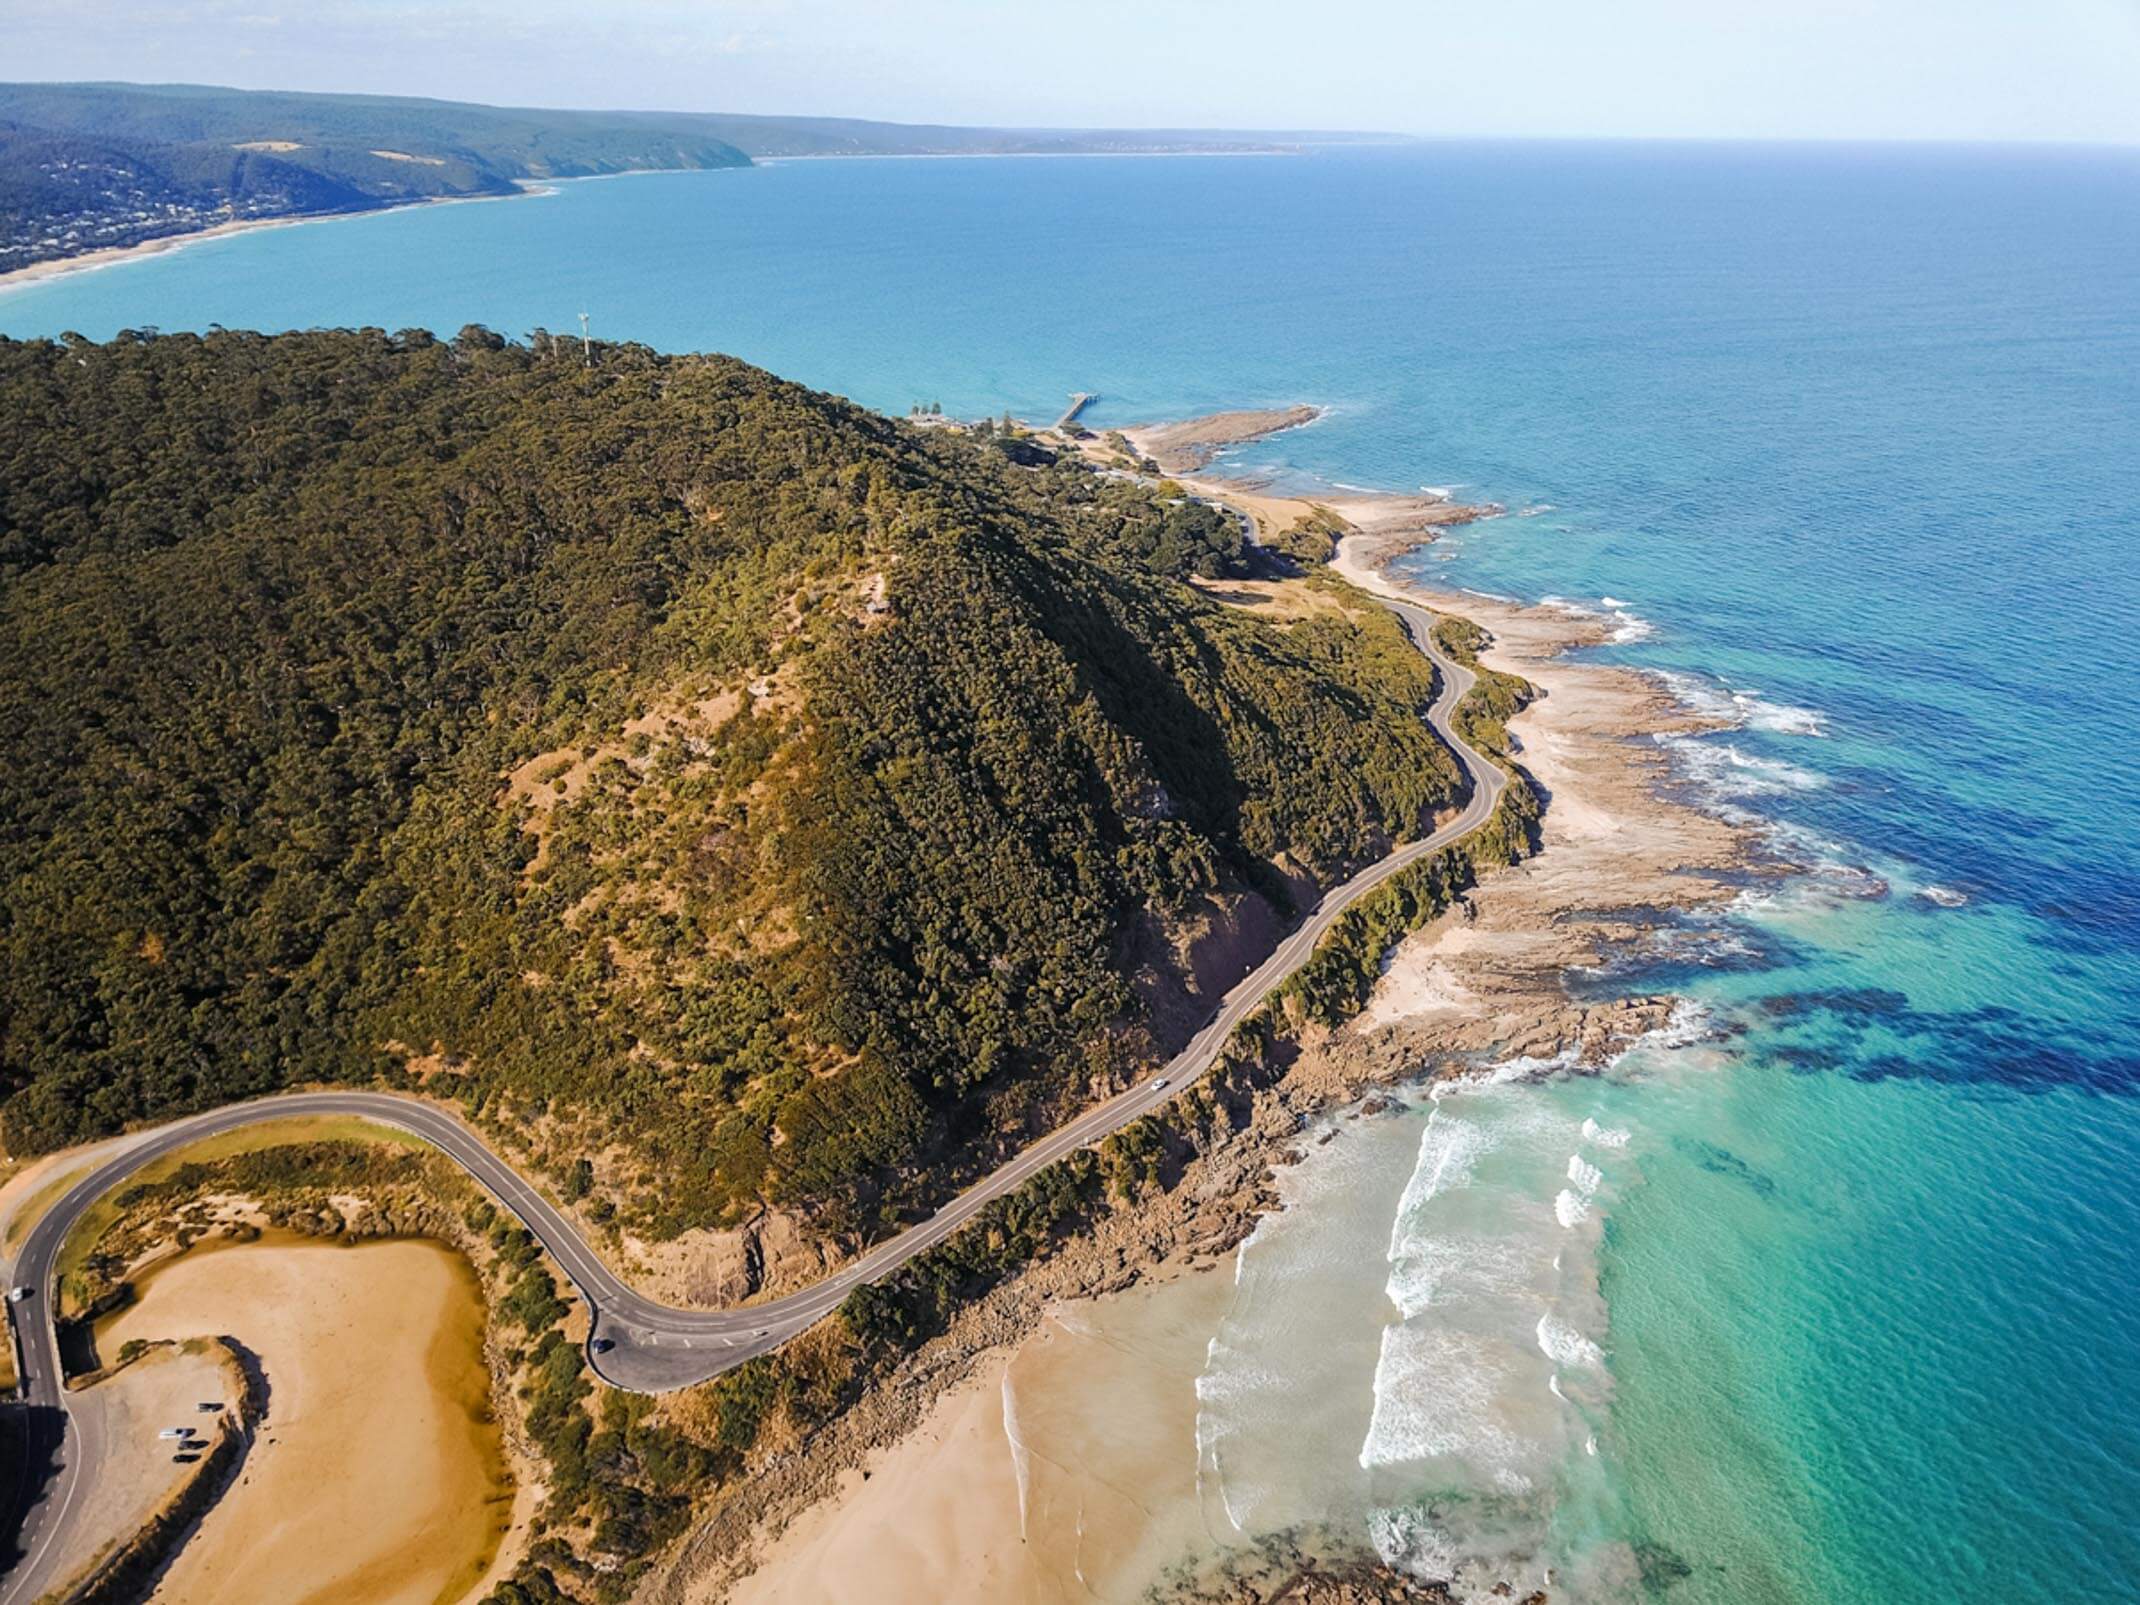 Video: A Great Ocean Road road trip from Melbourne